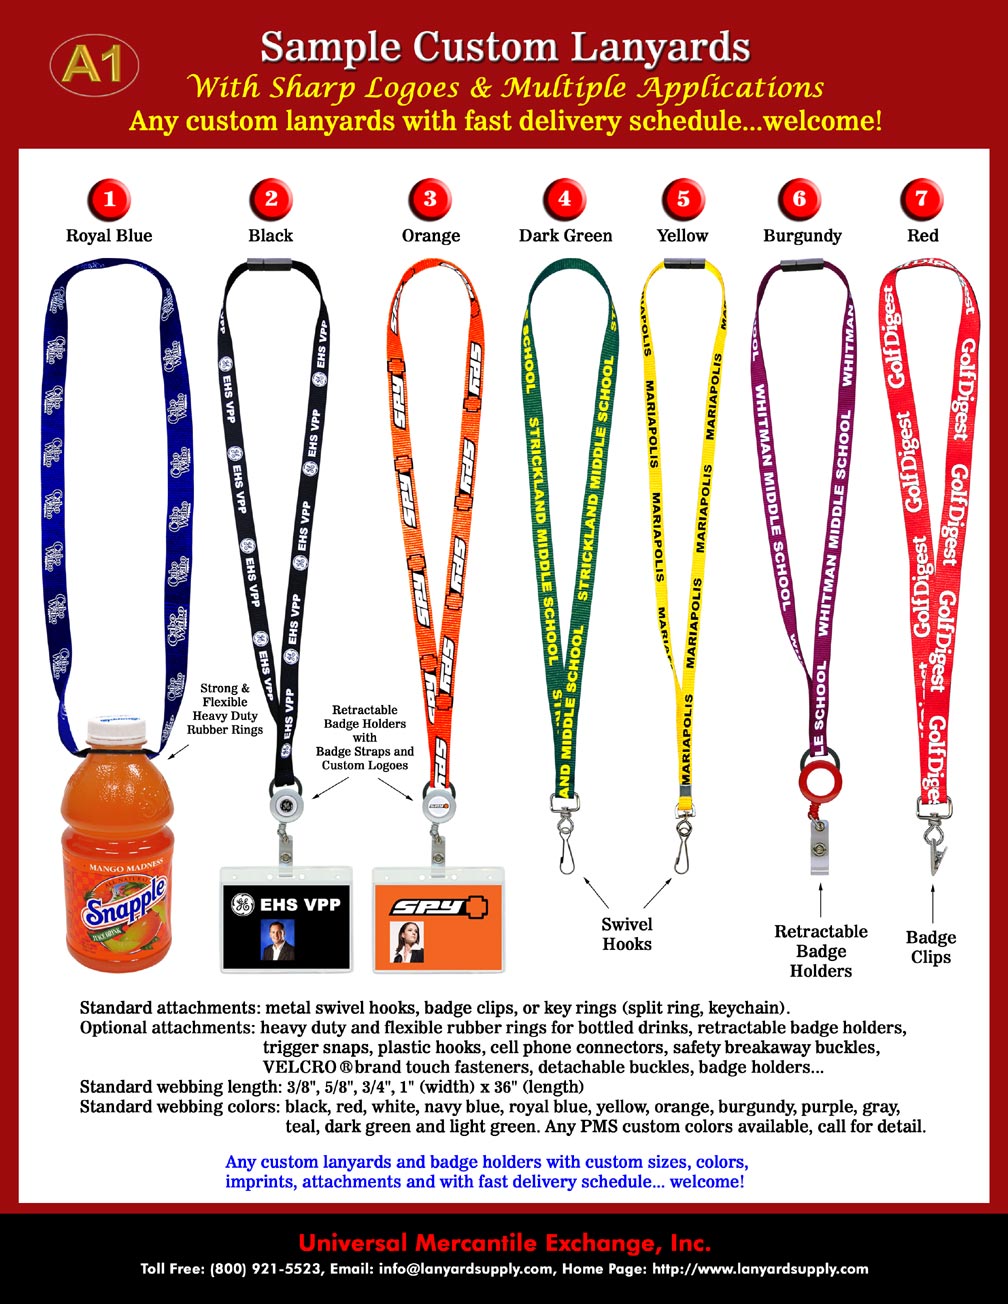 Lanyard: High-Quality and Heavy-Duty Lanyards with option of Safety Break away